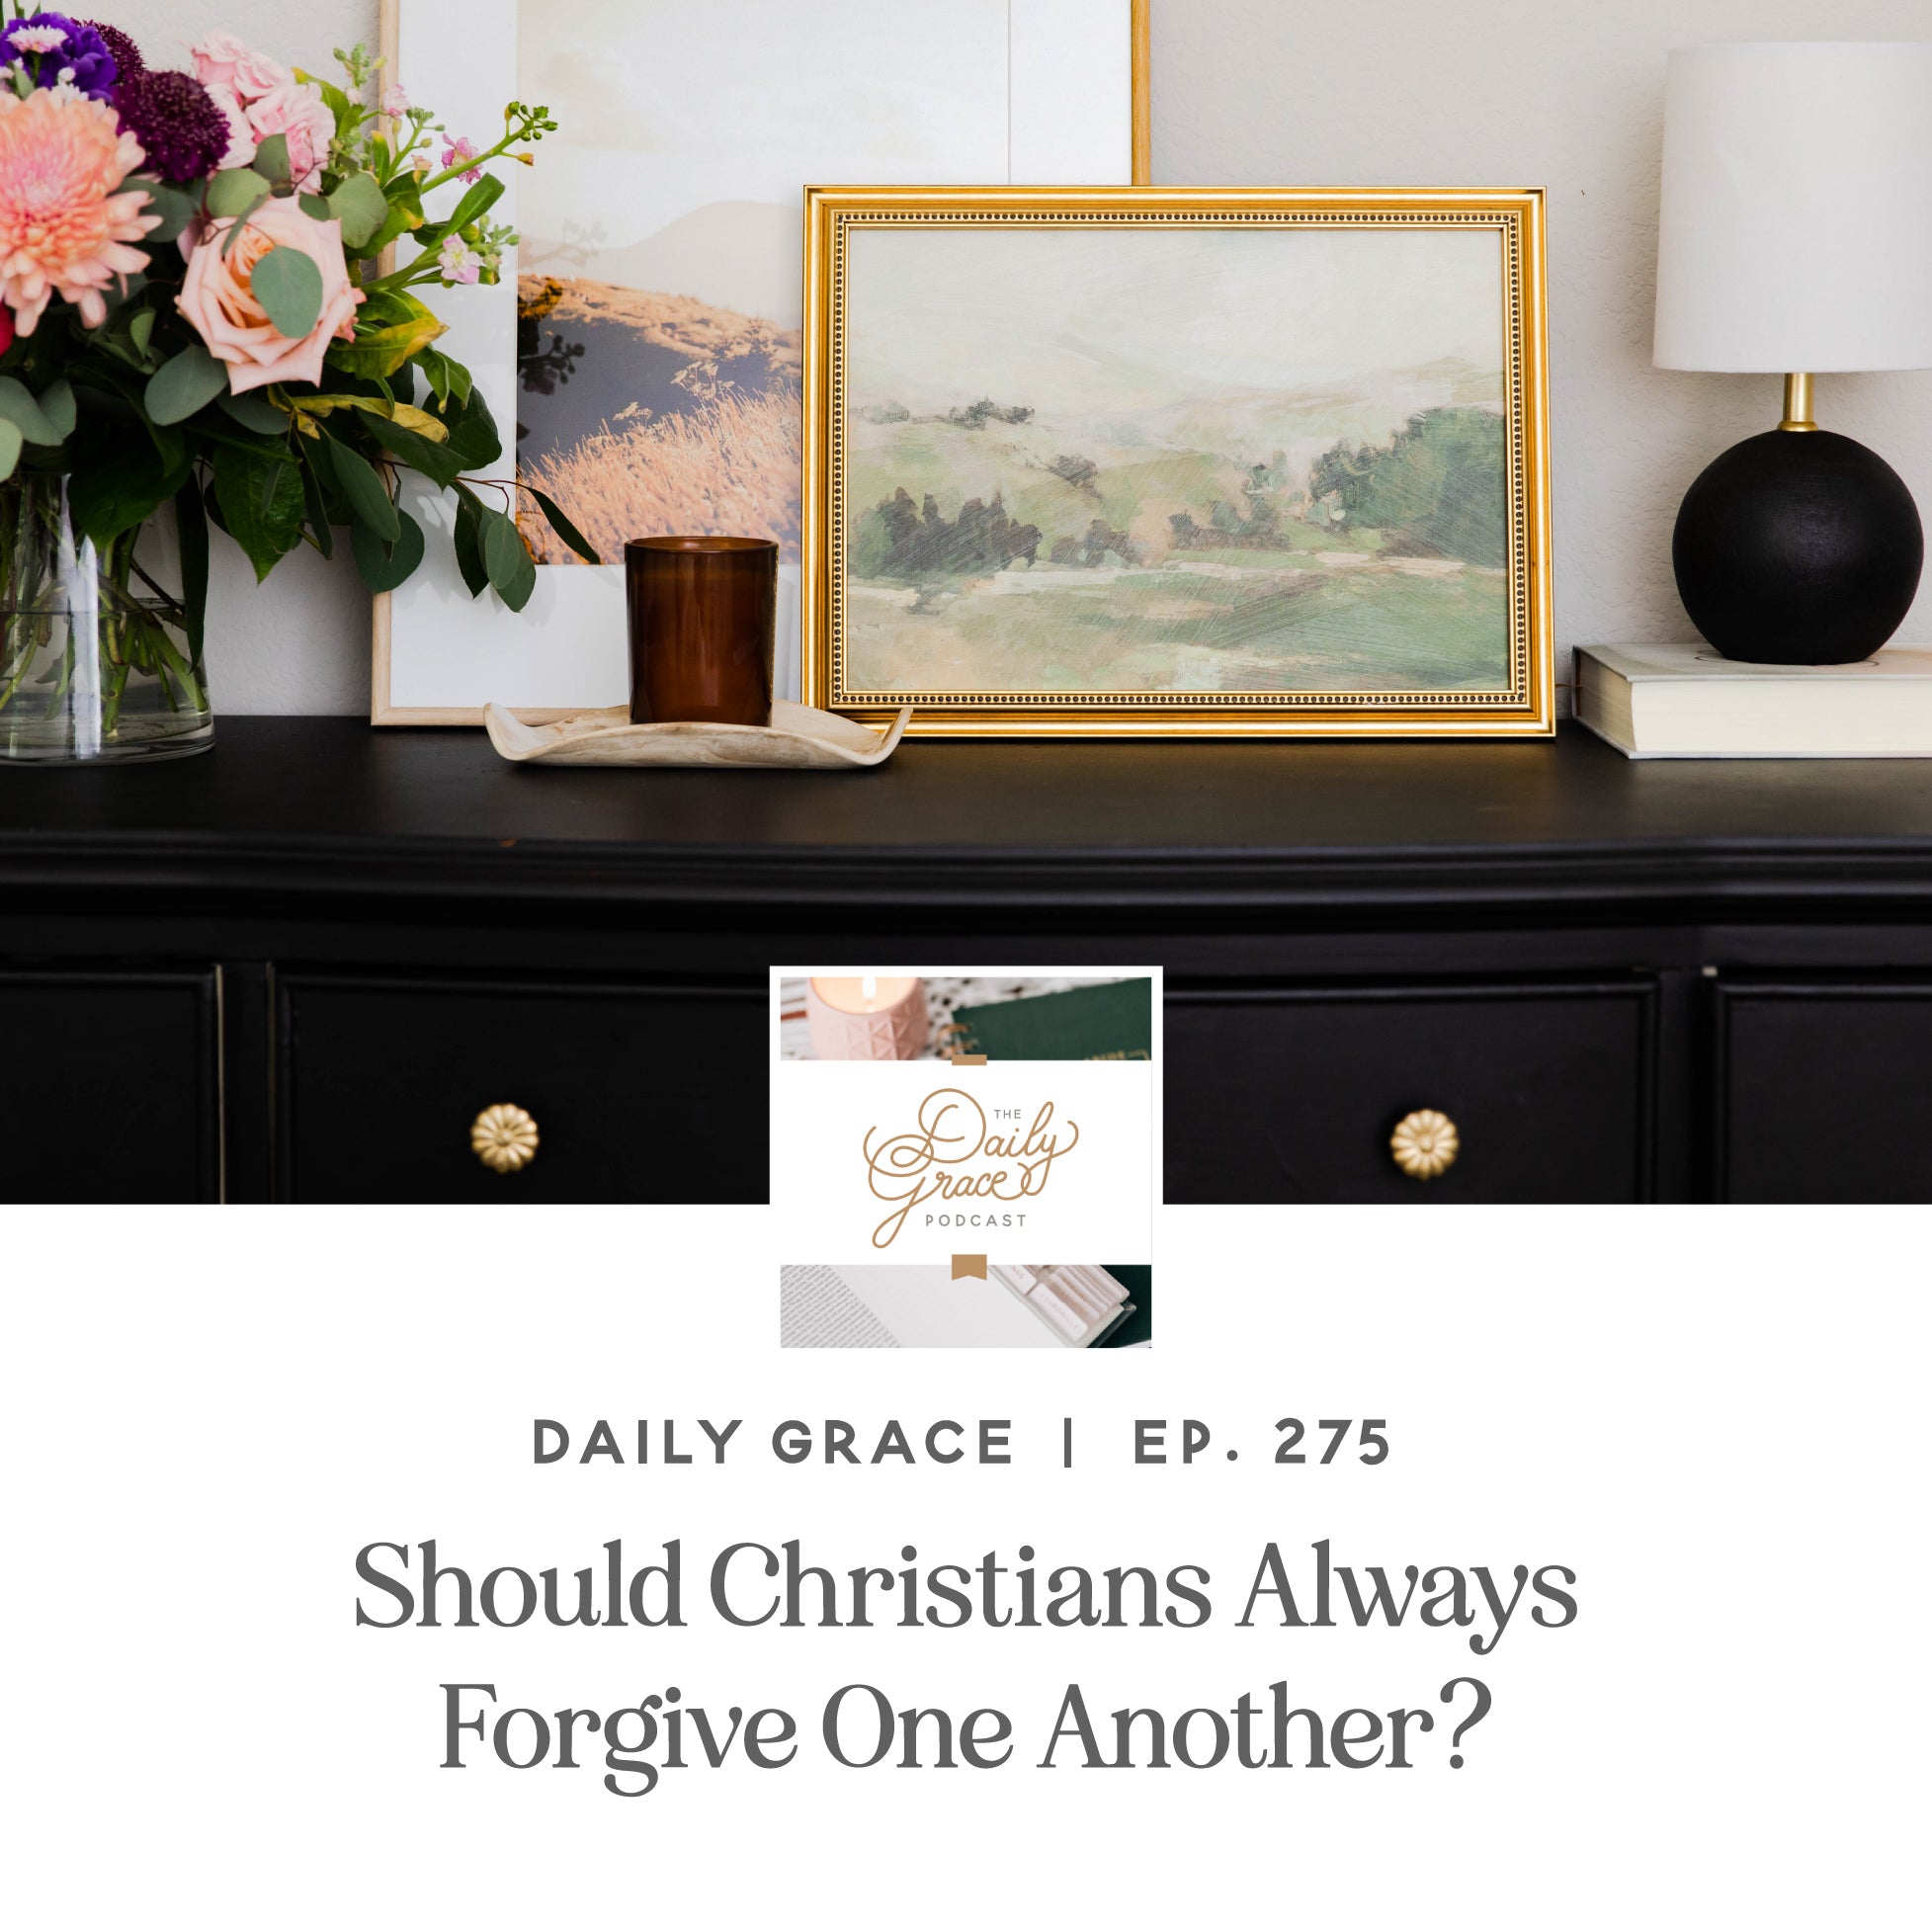 Should Christians Always Forgive One Another? | TDGC